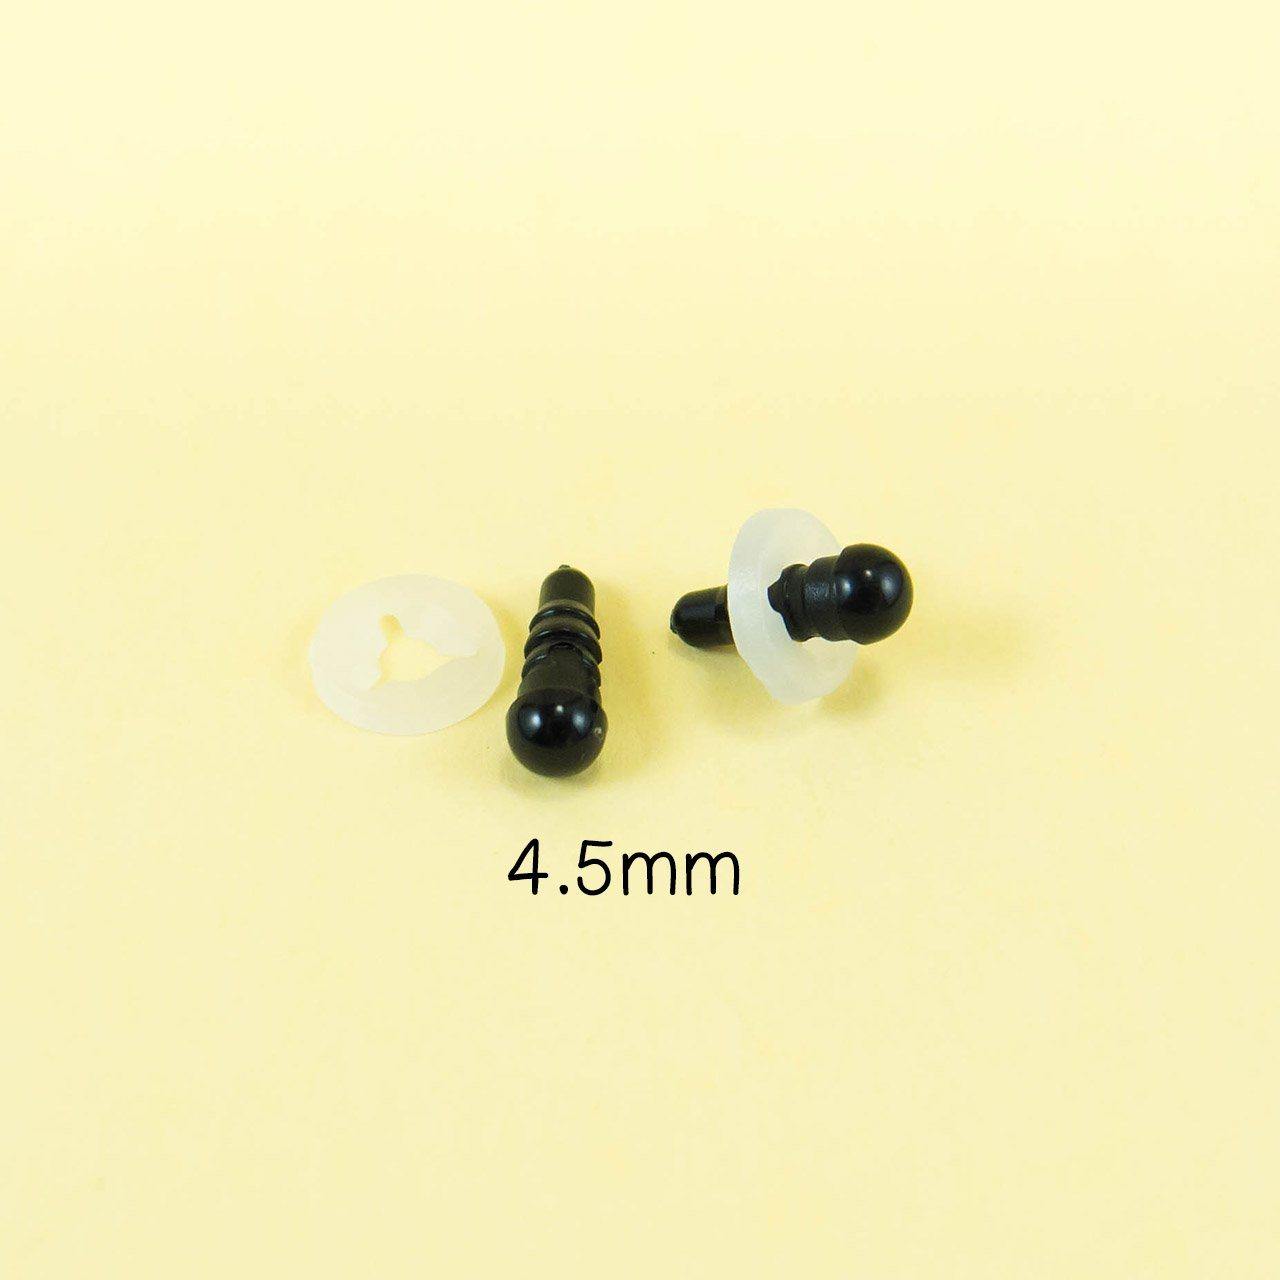 4.5mm safety eyes for crafts